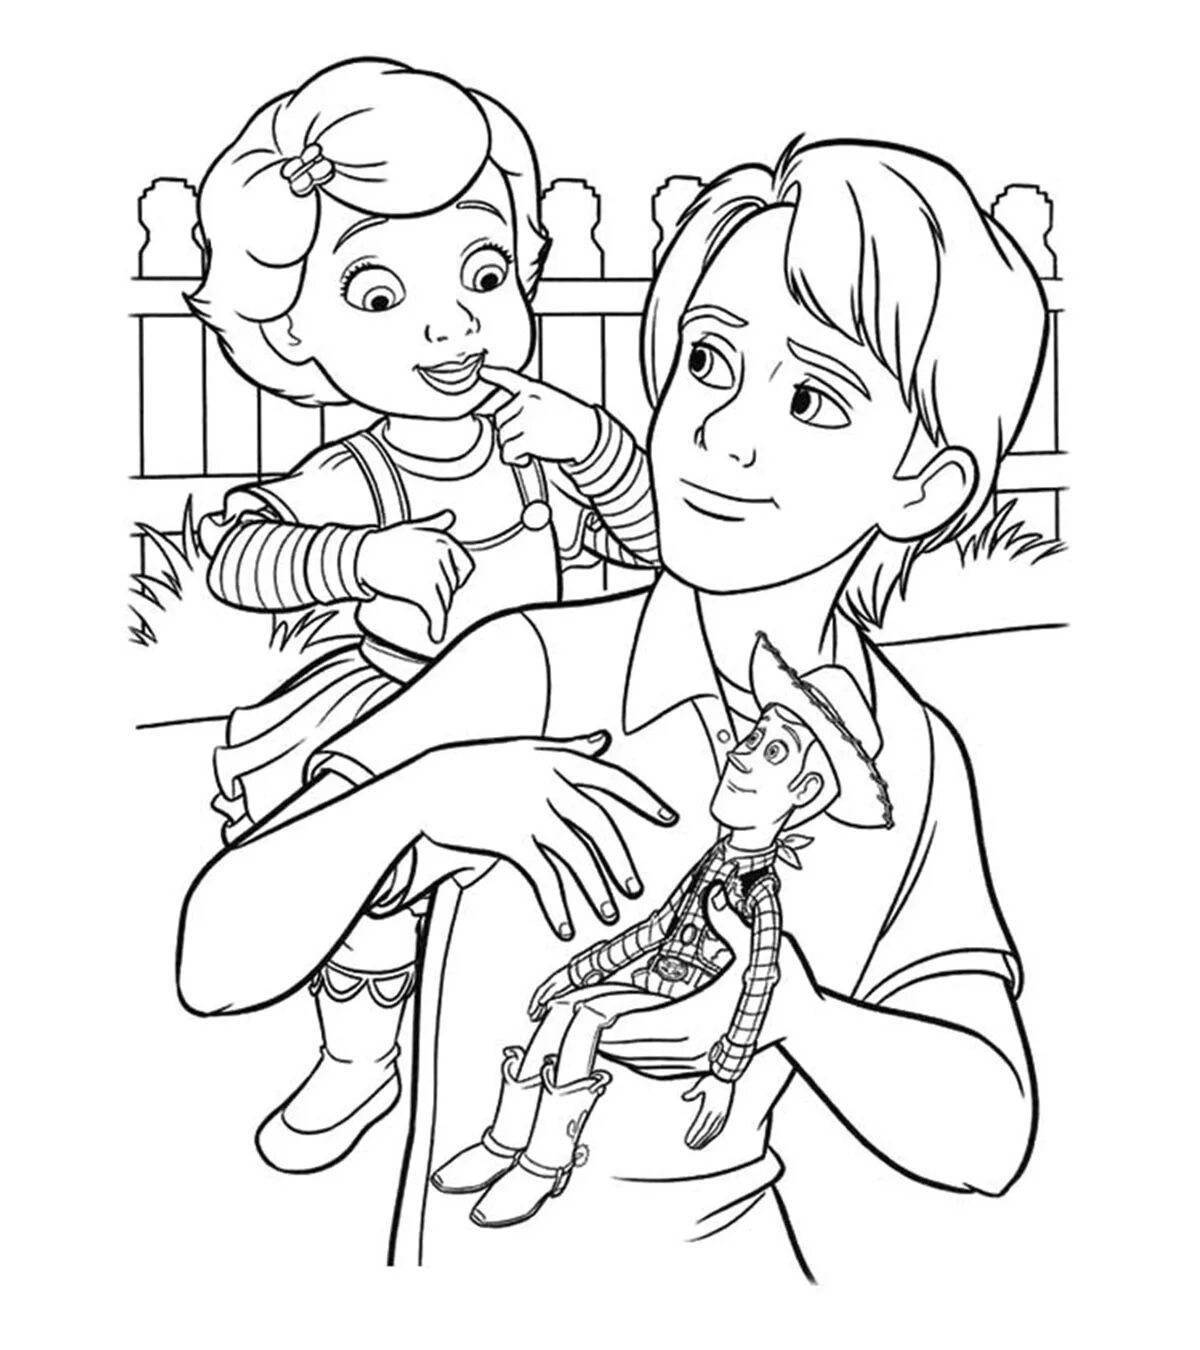 Inspirational gosh and world coloring page